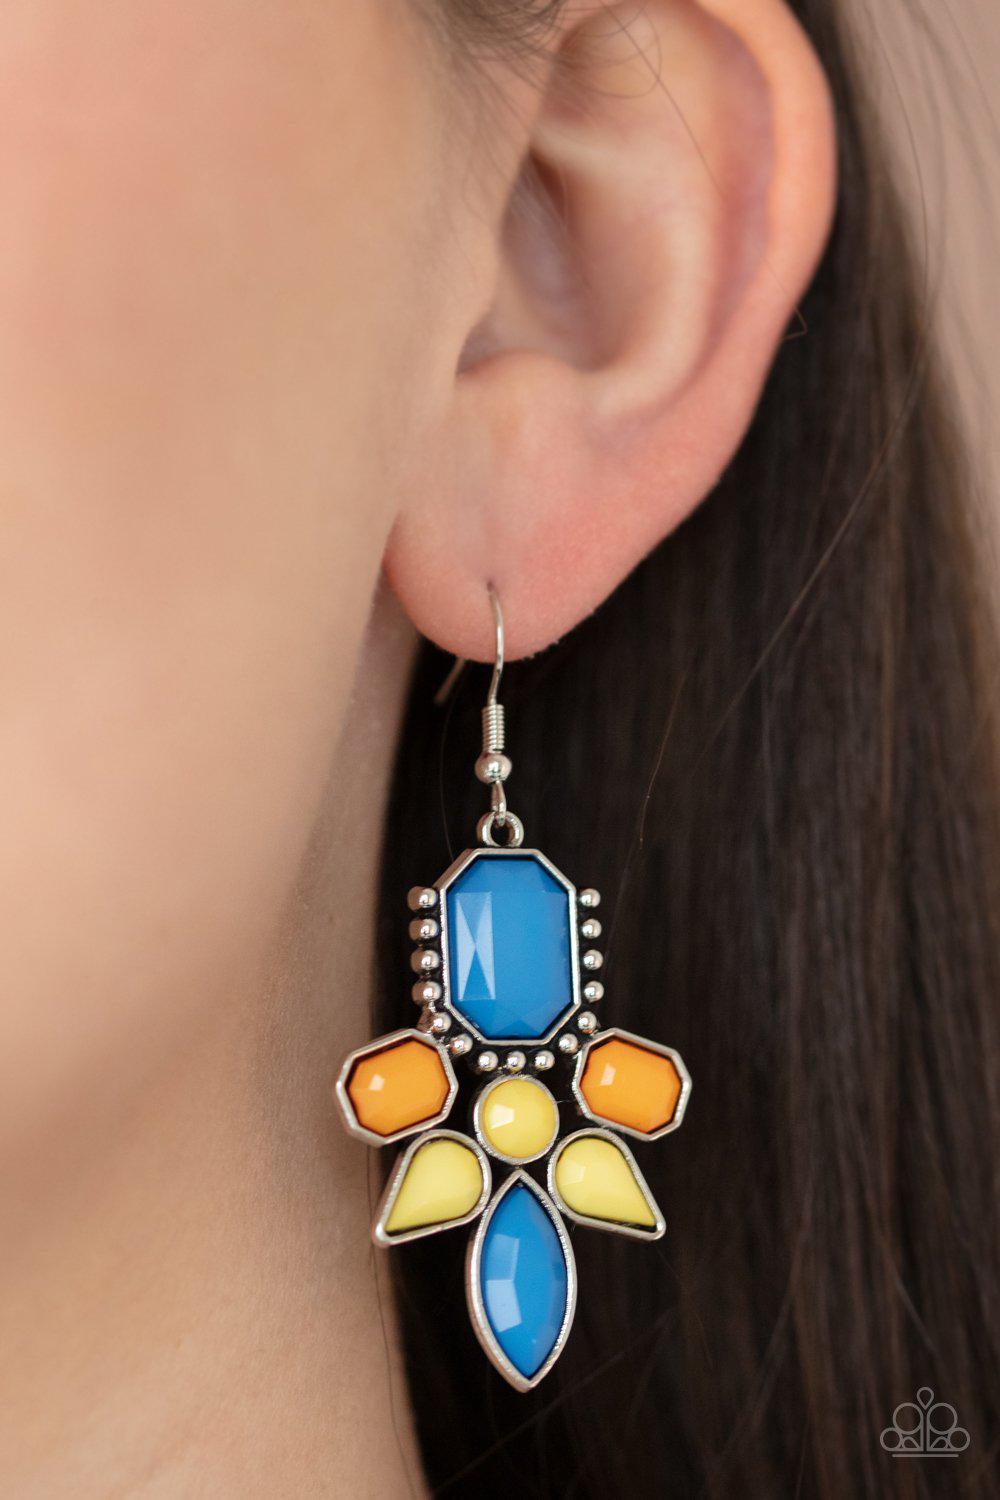 Vacay Vixen Multi Blue, Yellow and Marigold Earrings - Paparazzi Accessories- model - CarasShop.com - $5 Jewelry by Cara Jewels